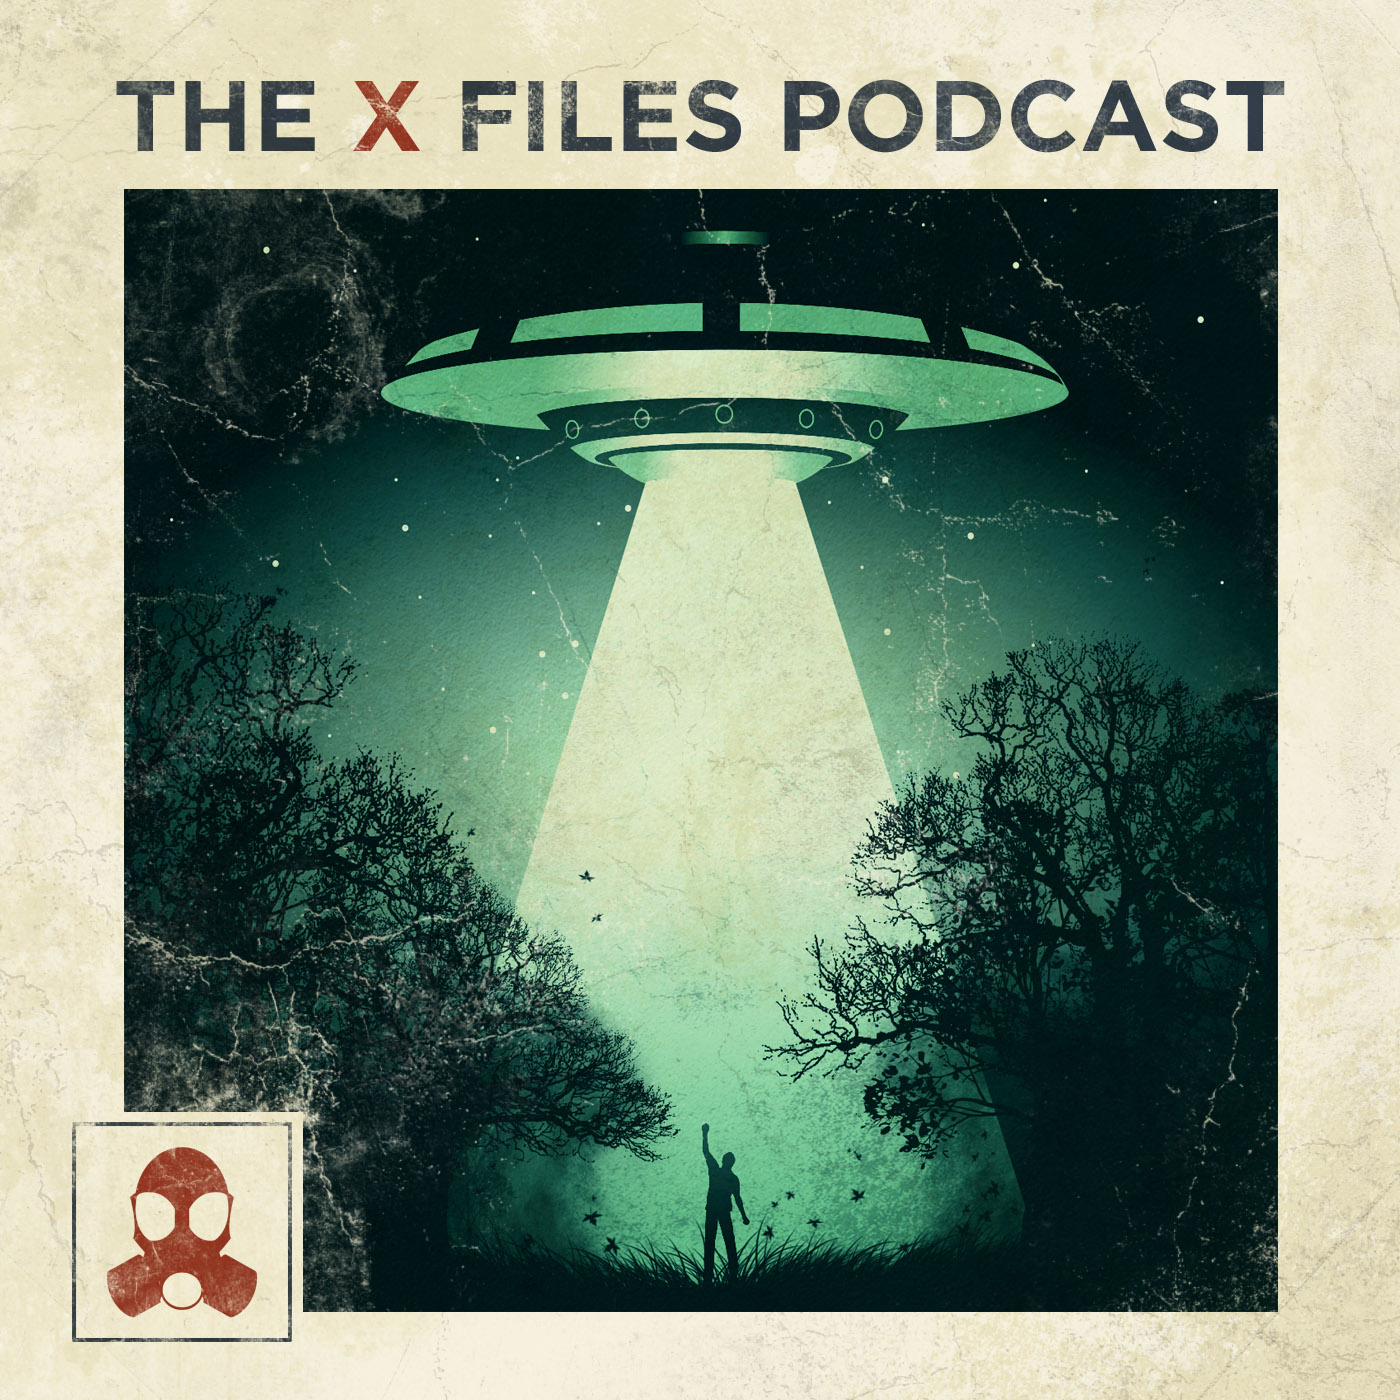 Artwork for podcast The X-Files Podcast